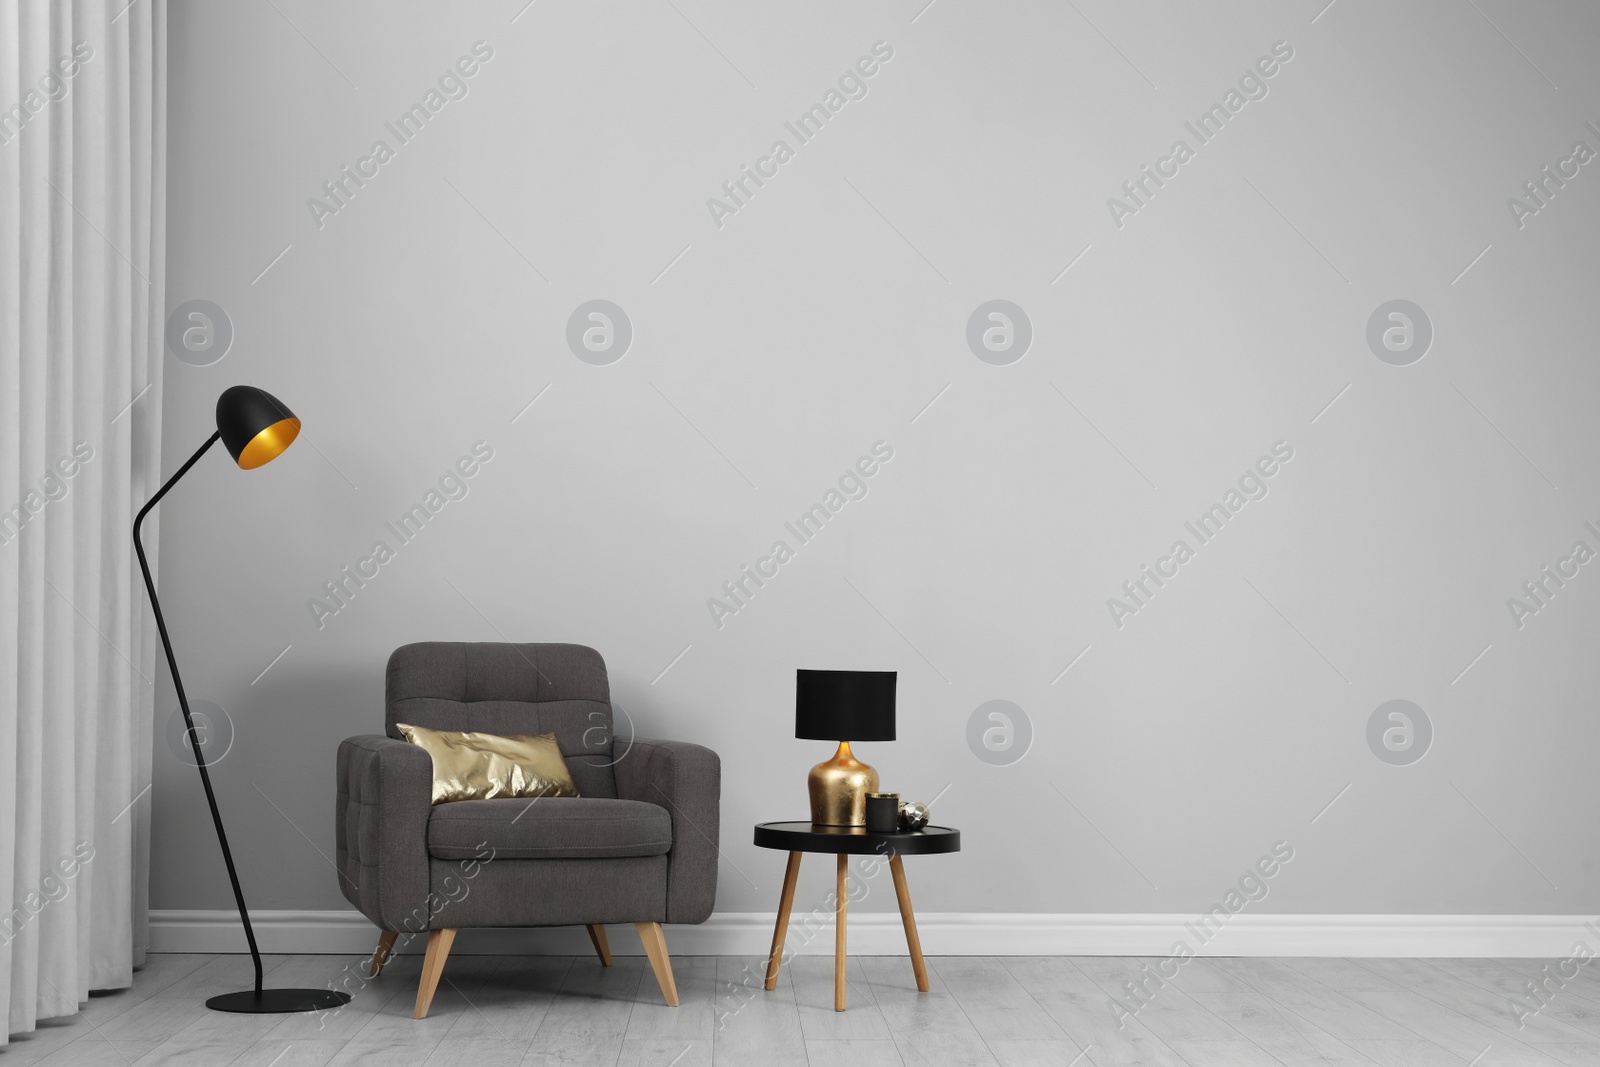 Photo of Stylish interior with armchair, table and floor lamp near wall in room, space for text